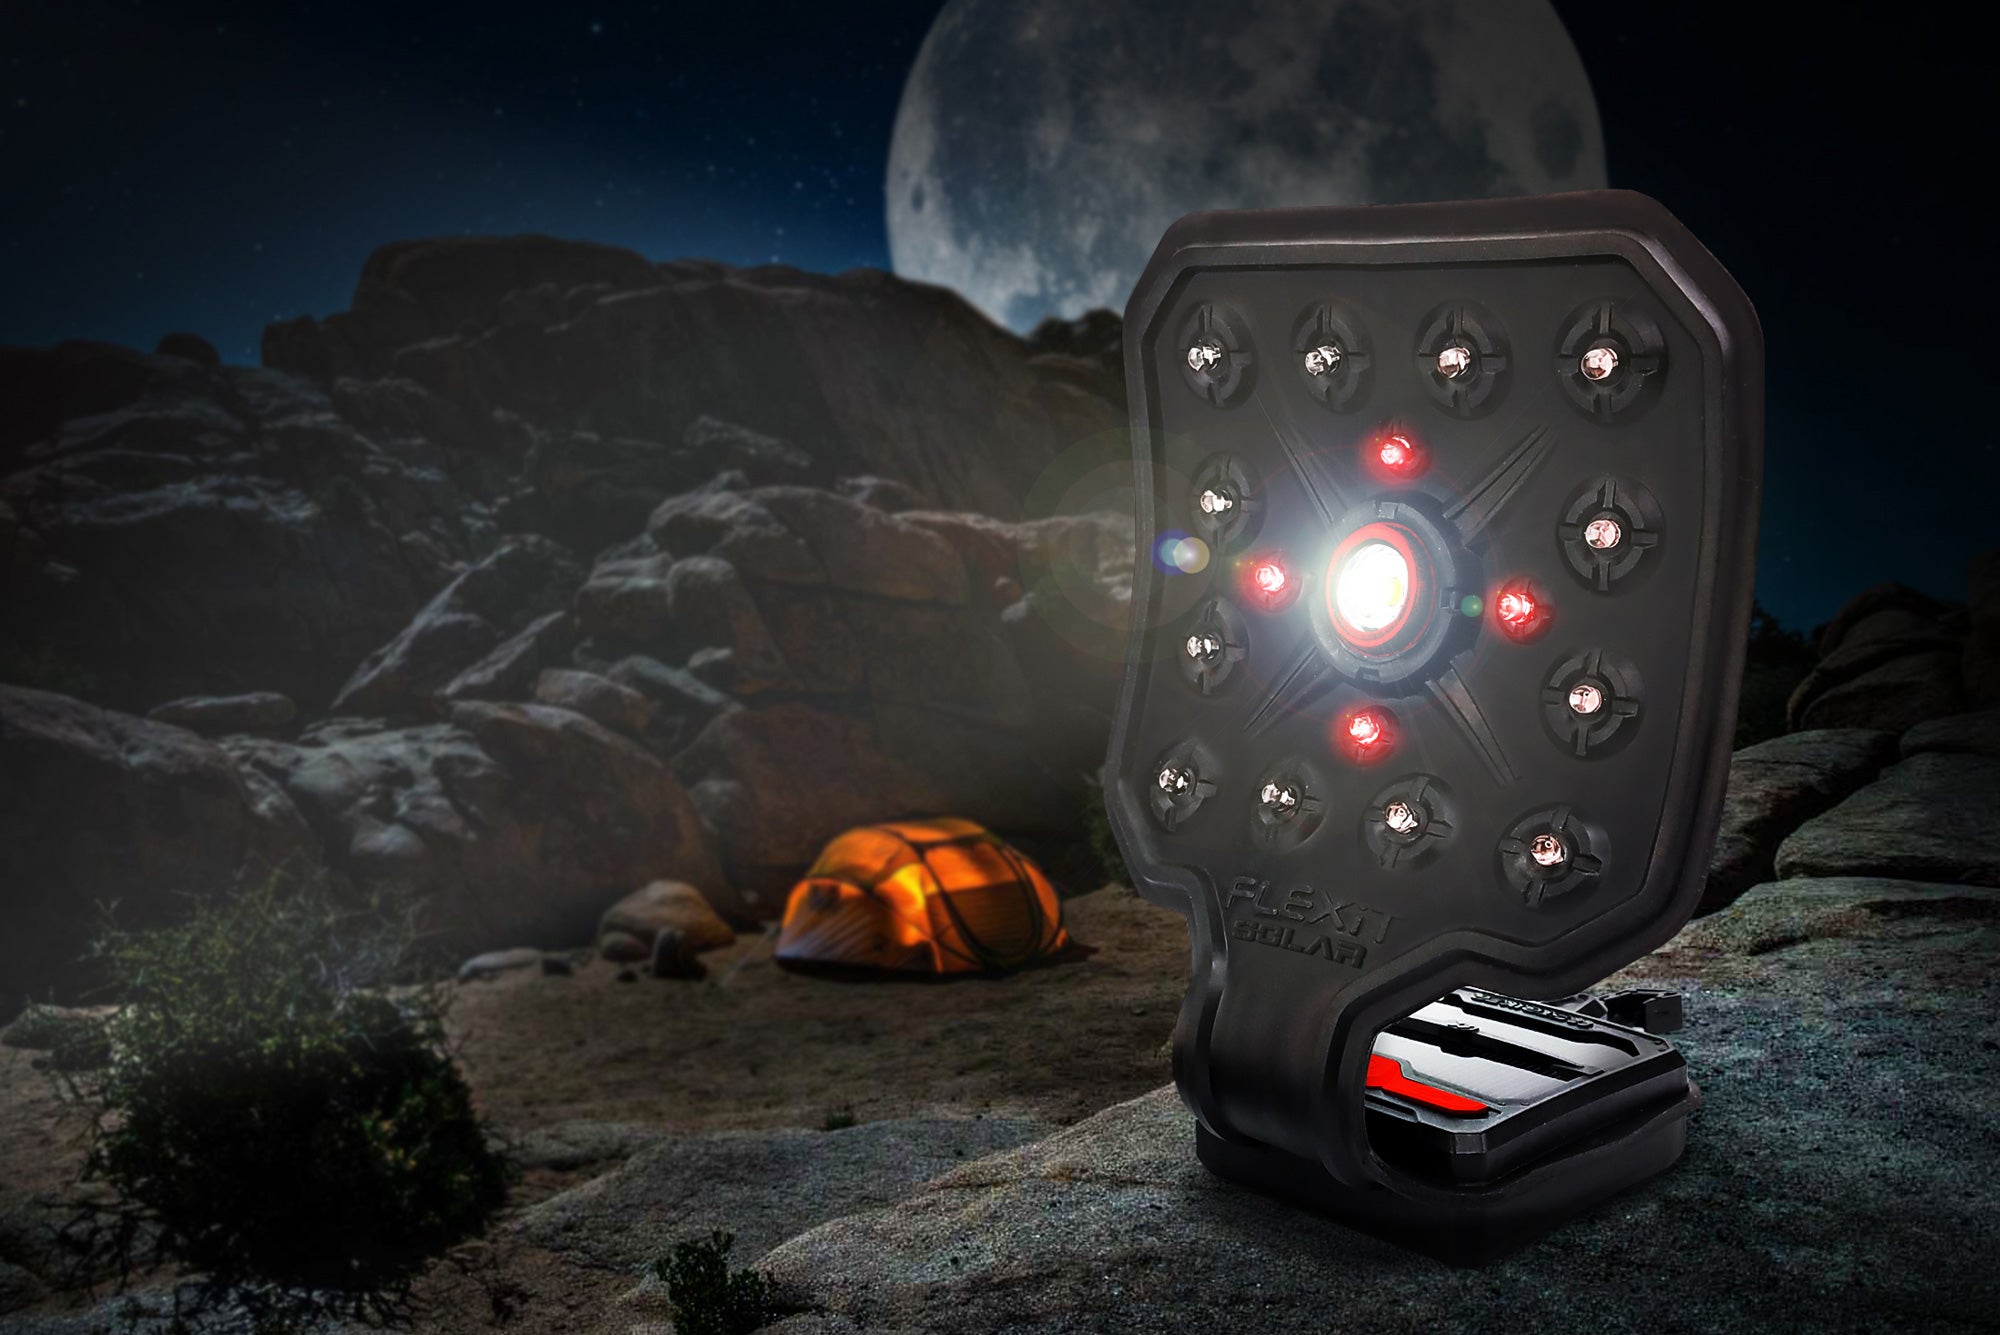 FLEXIT Solar Flexible Flashlight with Solar Charging Panel posing in a nighttime camping scene | STKR Concepts - striker